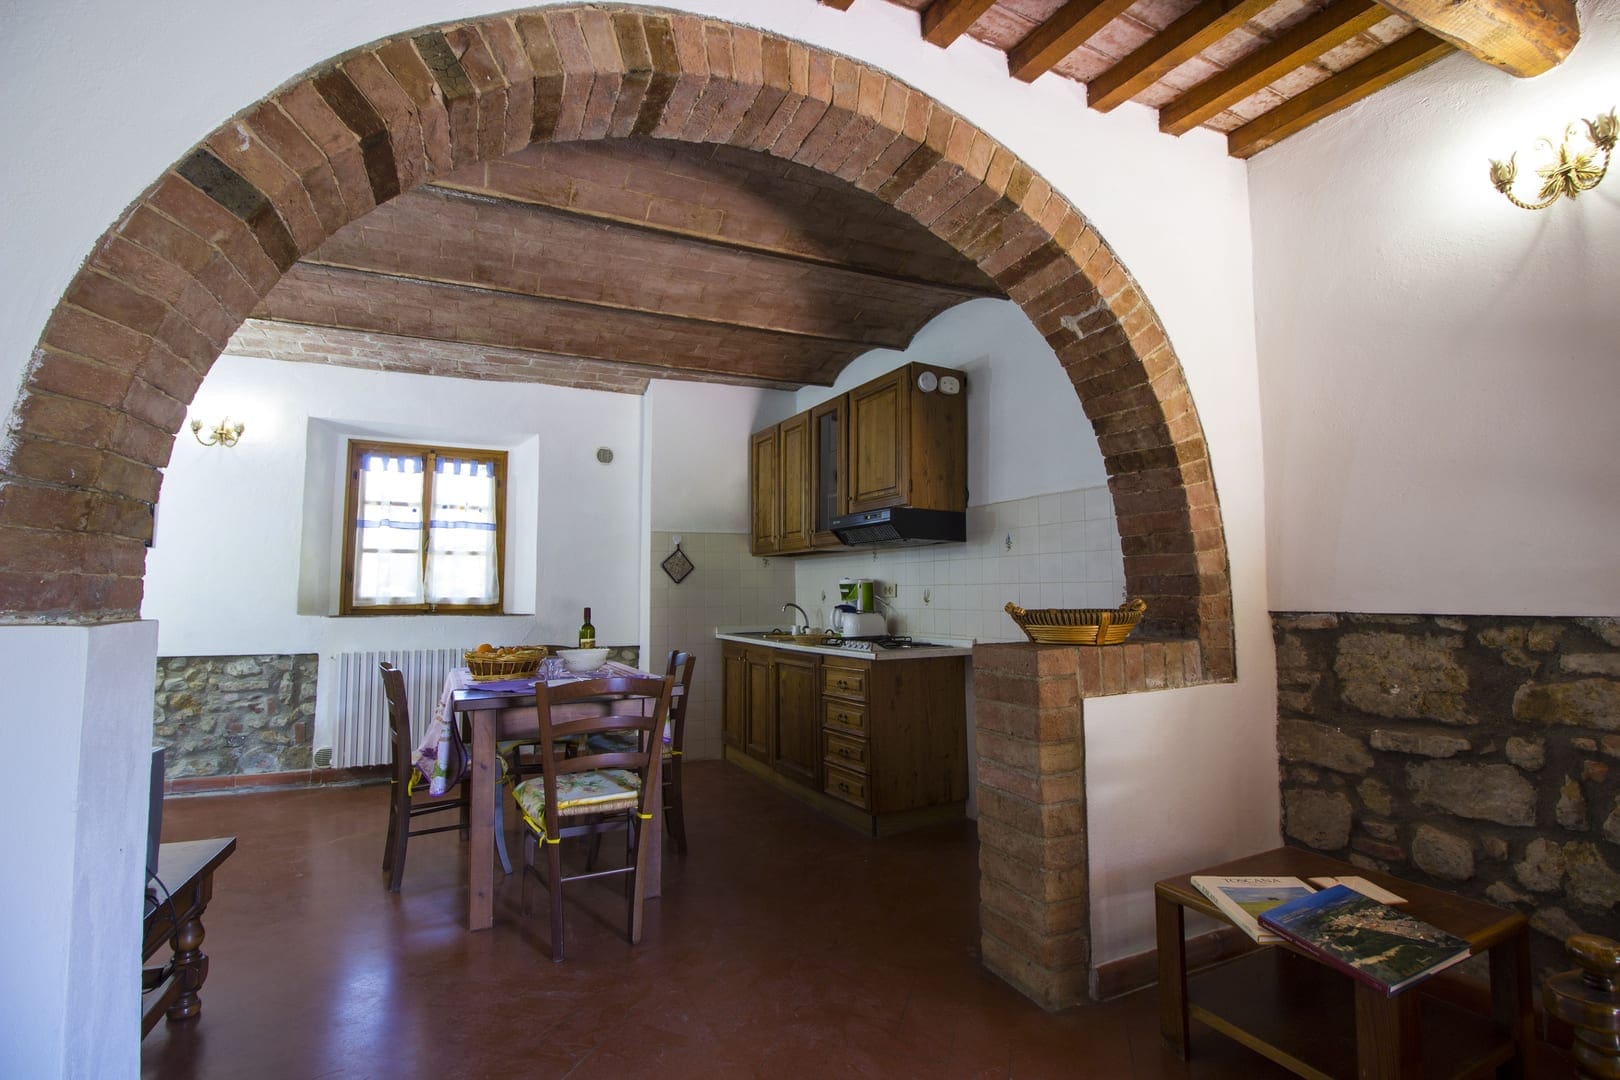 A kitchen with an arch in the middle of it